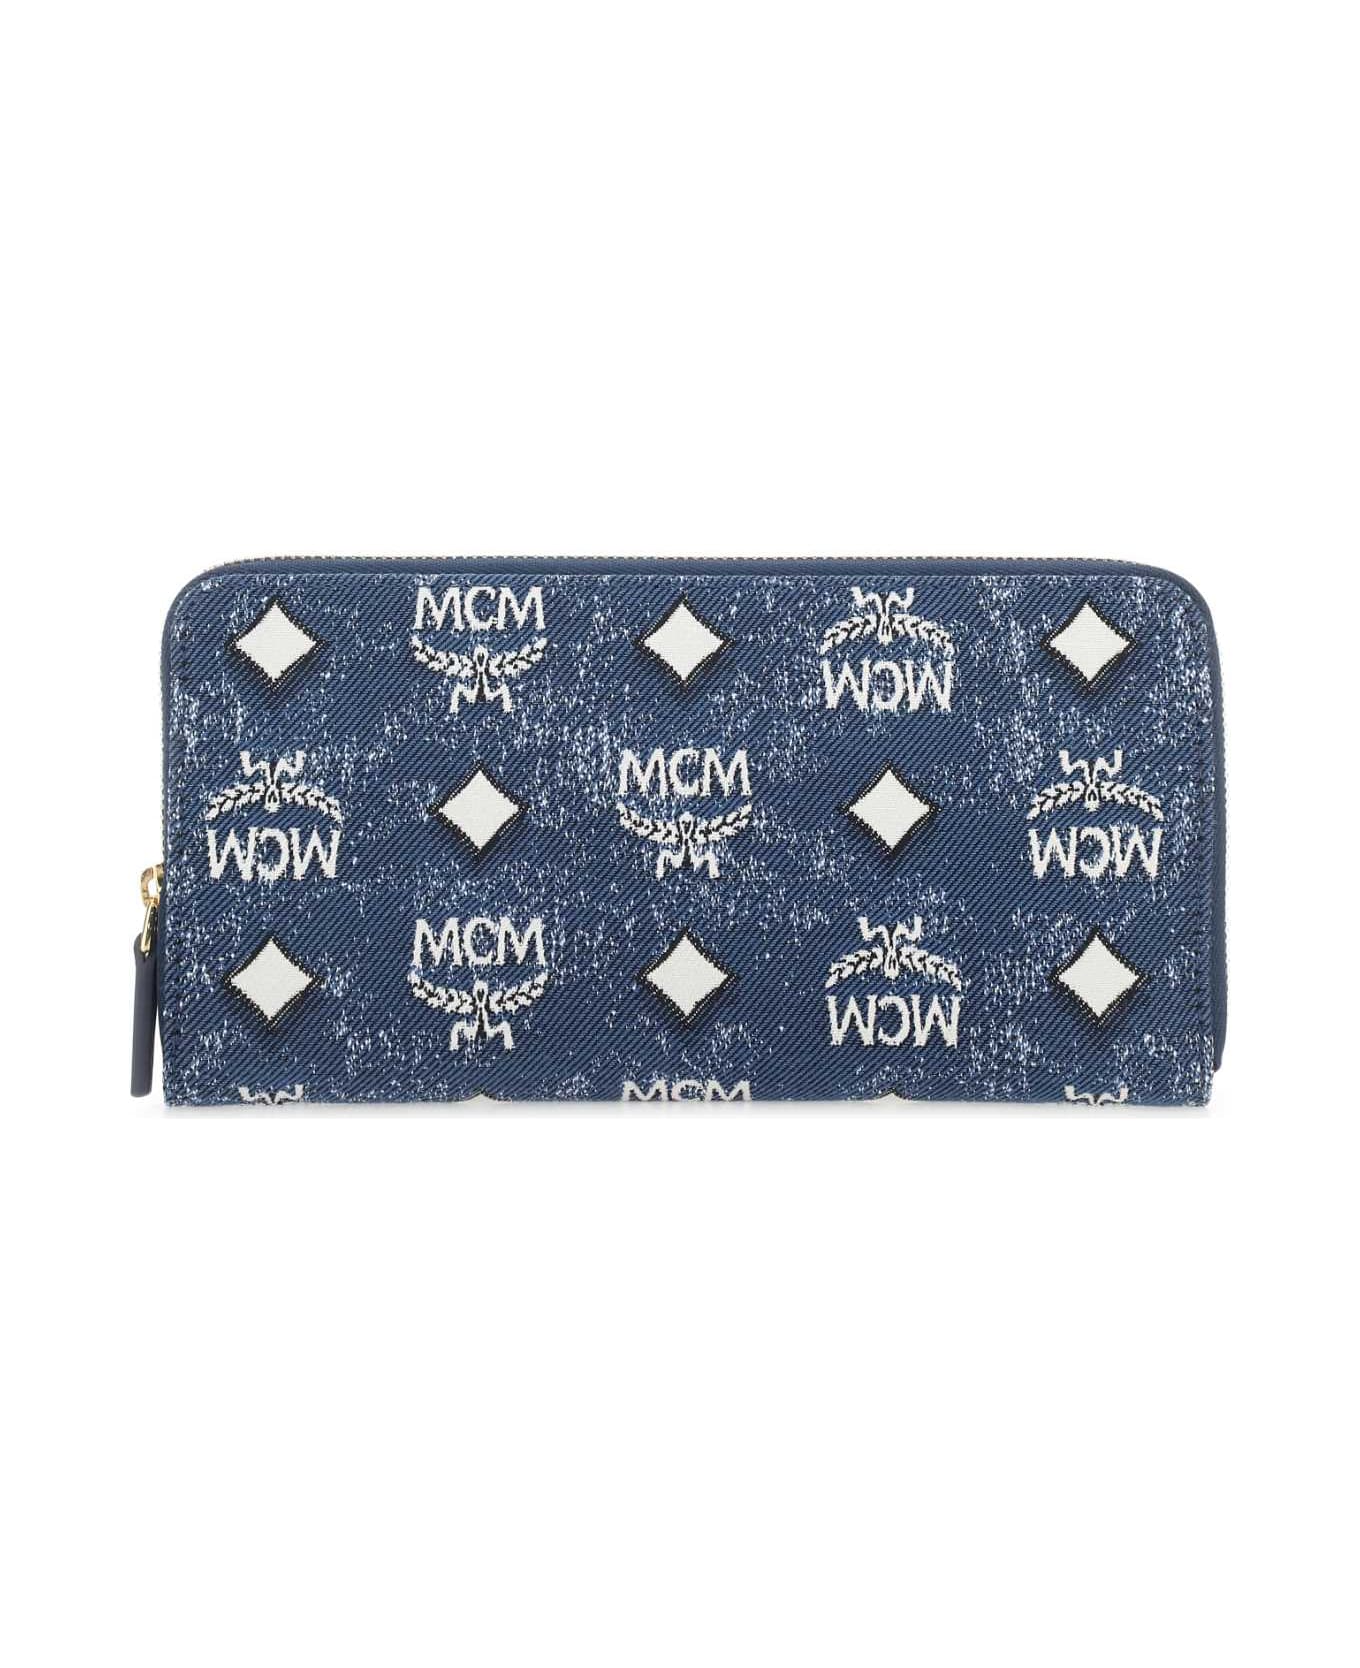 MCM Embroidered Canvas Wallet - LE 財布